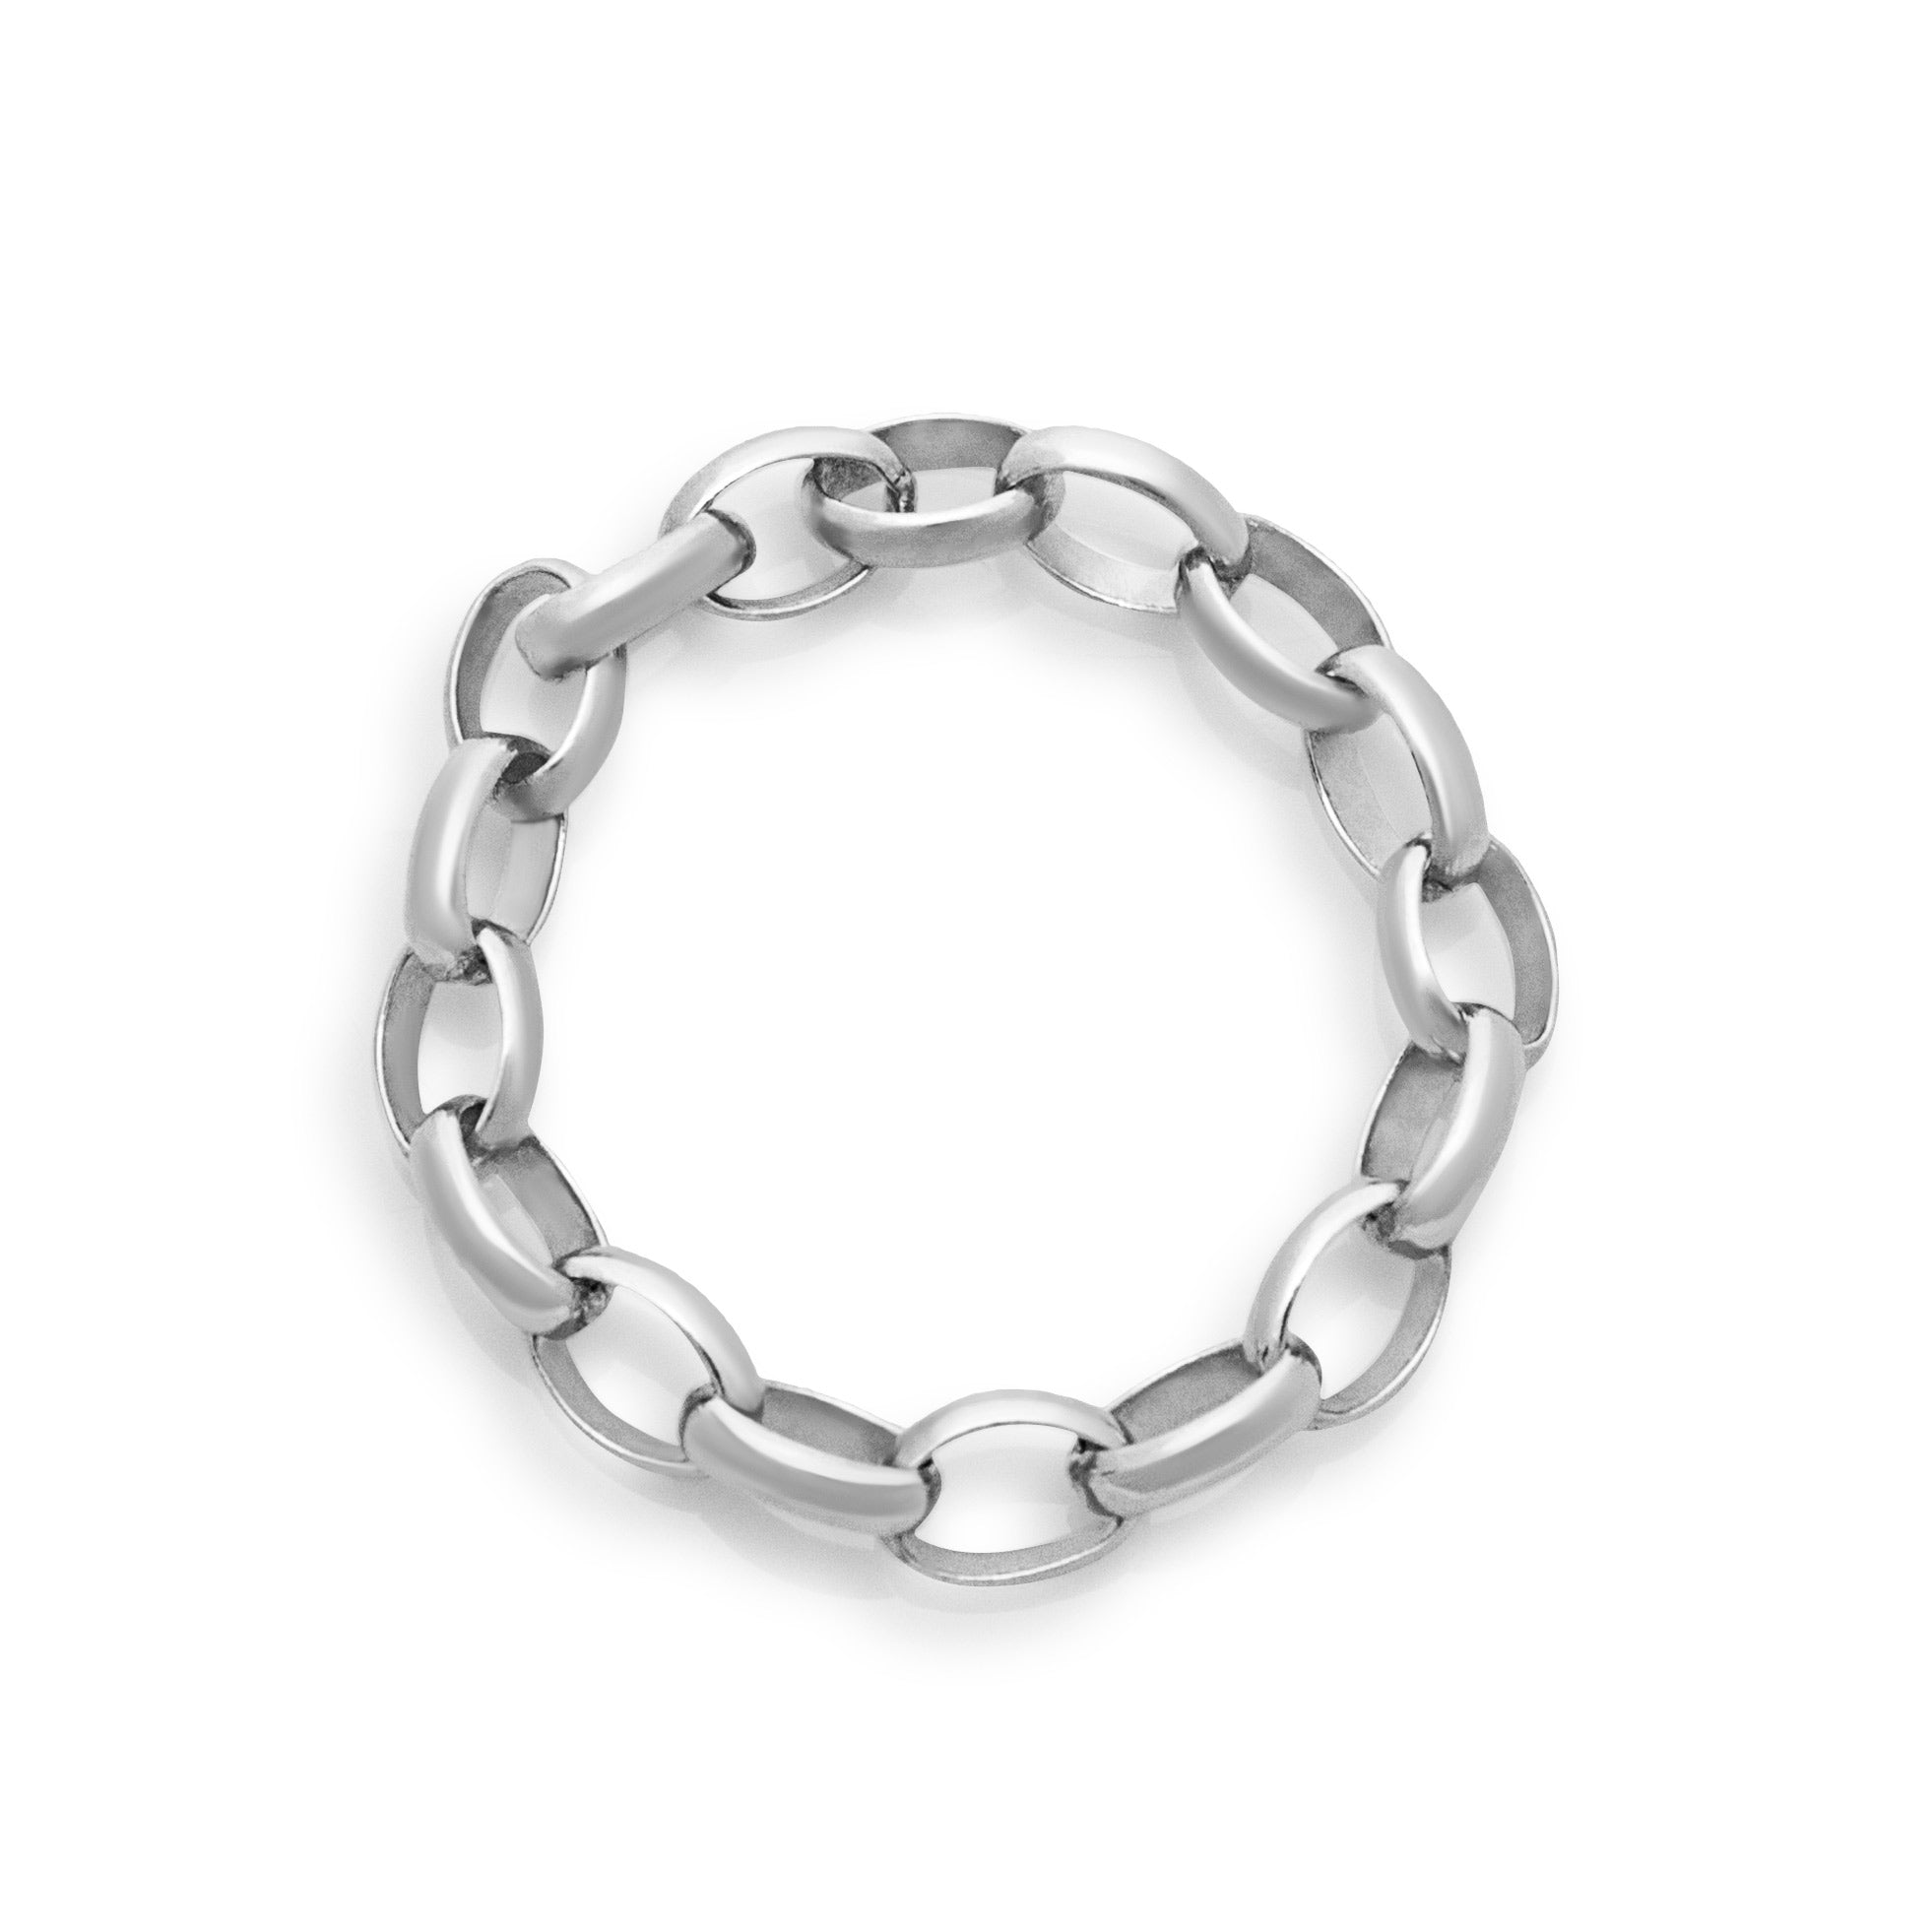 Silver chain ring. Chain ring. Silver ring. Belcher chain. Staple ring. Silver chain. Serena Ansell Jewellery.